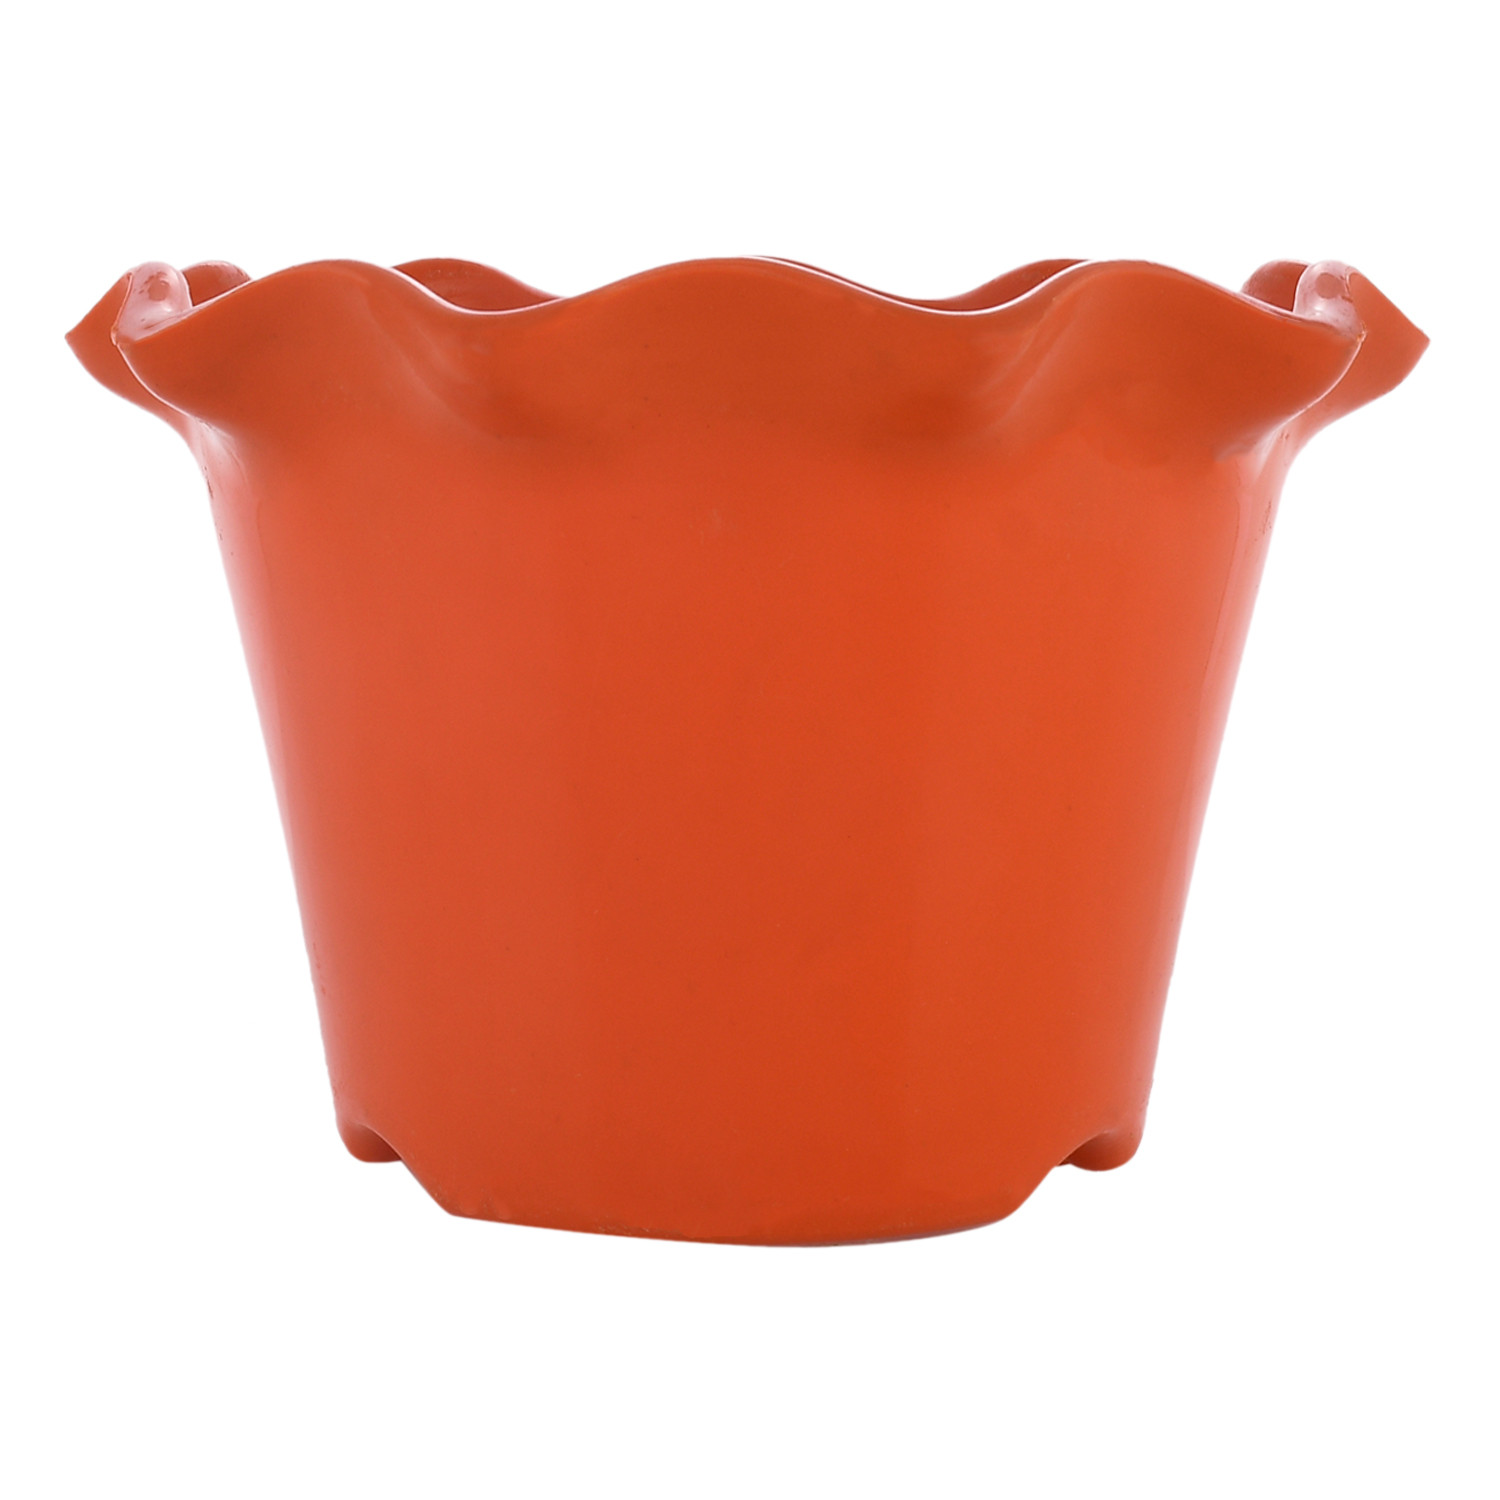 Kuber Industries Blossom Flower Pot|Durable Plastic Flower Pot|Gamla With Drain Holes for Home Décor|Balcony|Garden|8 Inch|Pack of 4 (Multicolor)